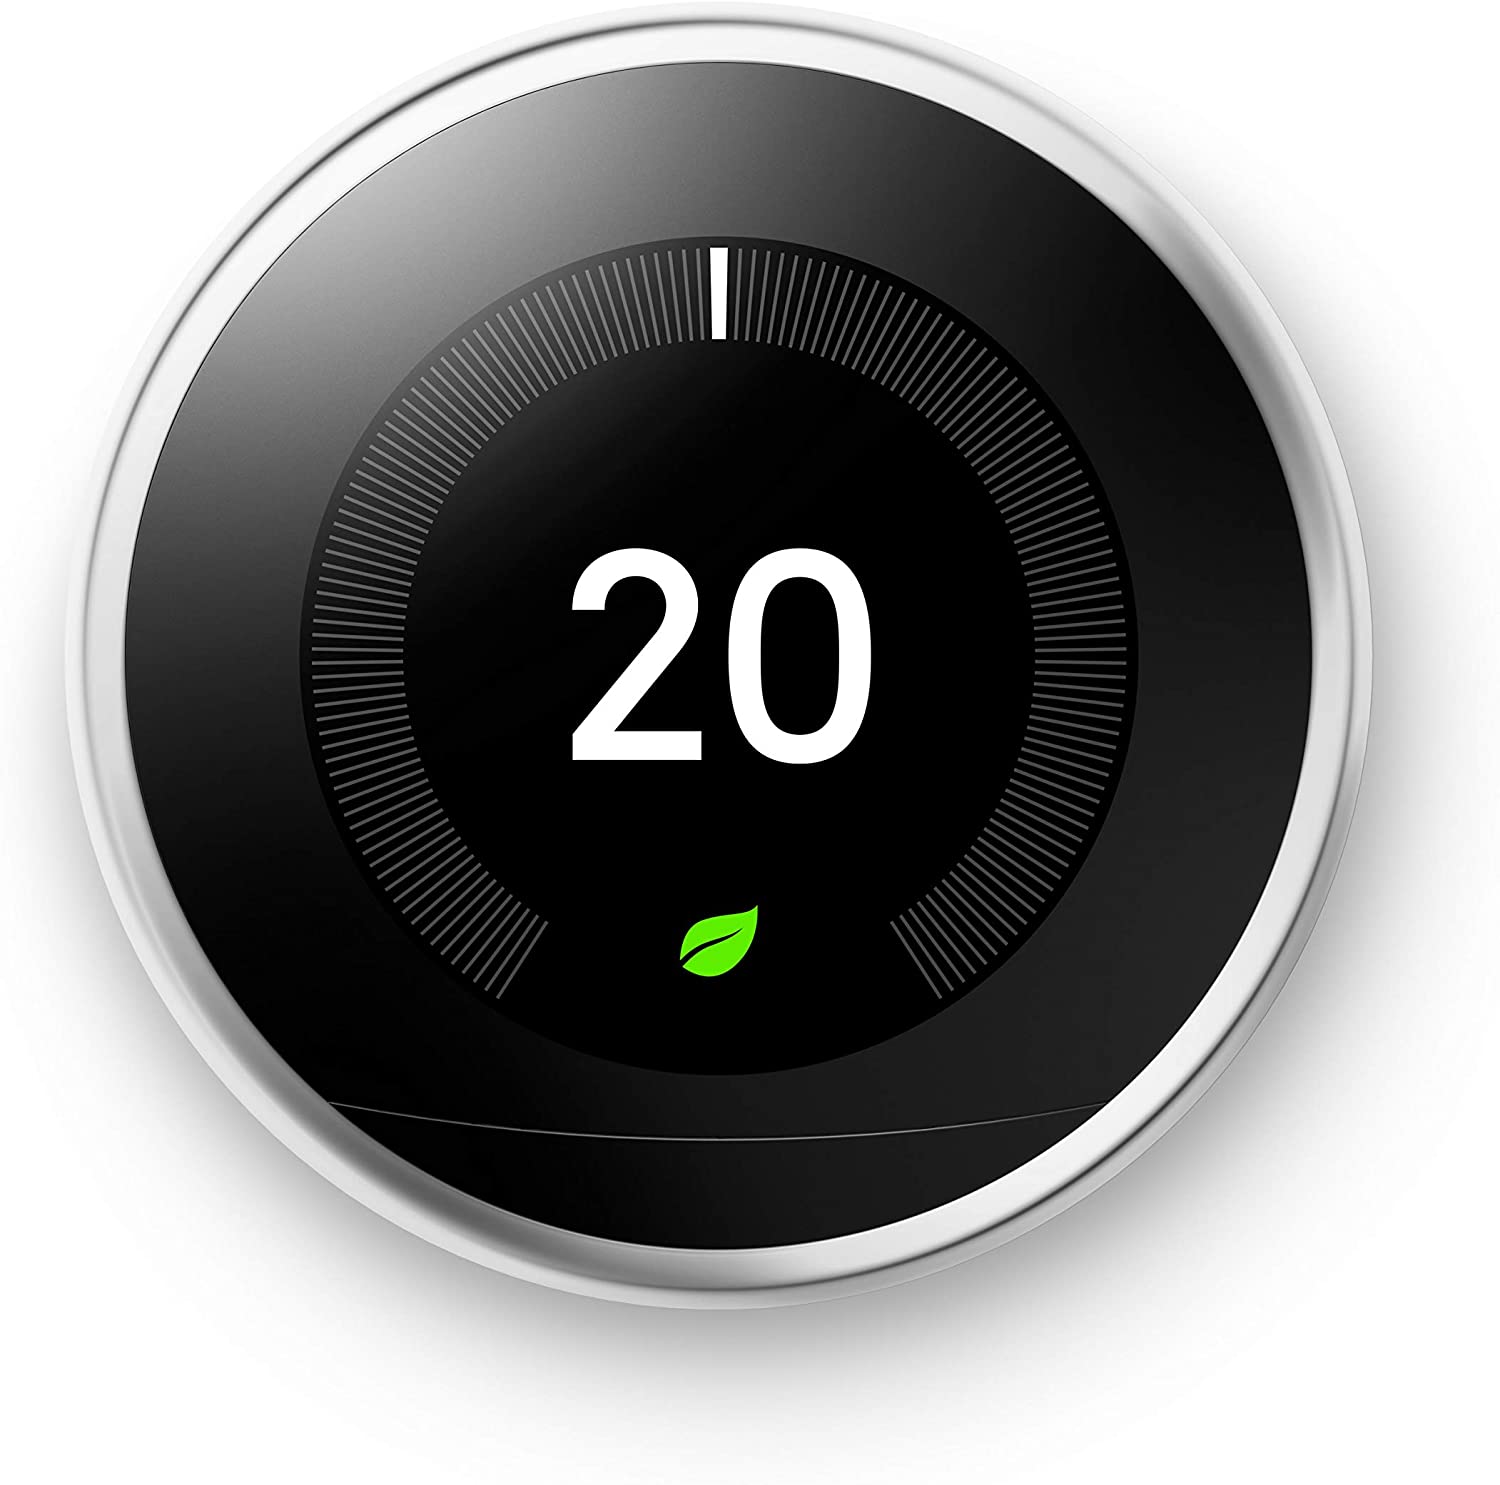  Nest Learning Thermostat, beautiful